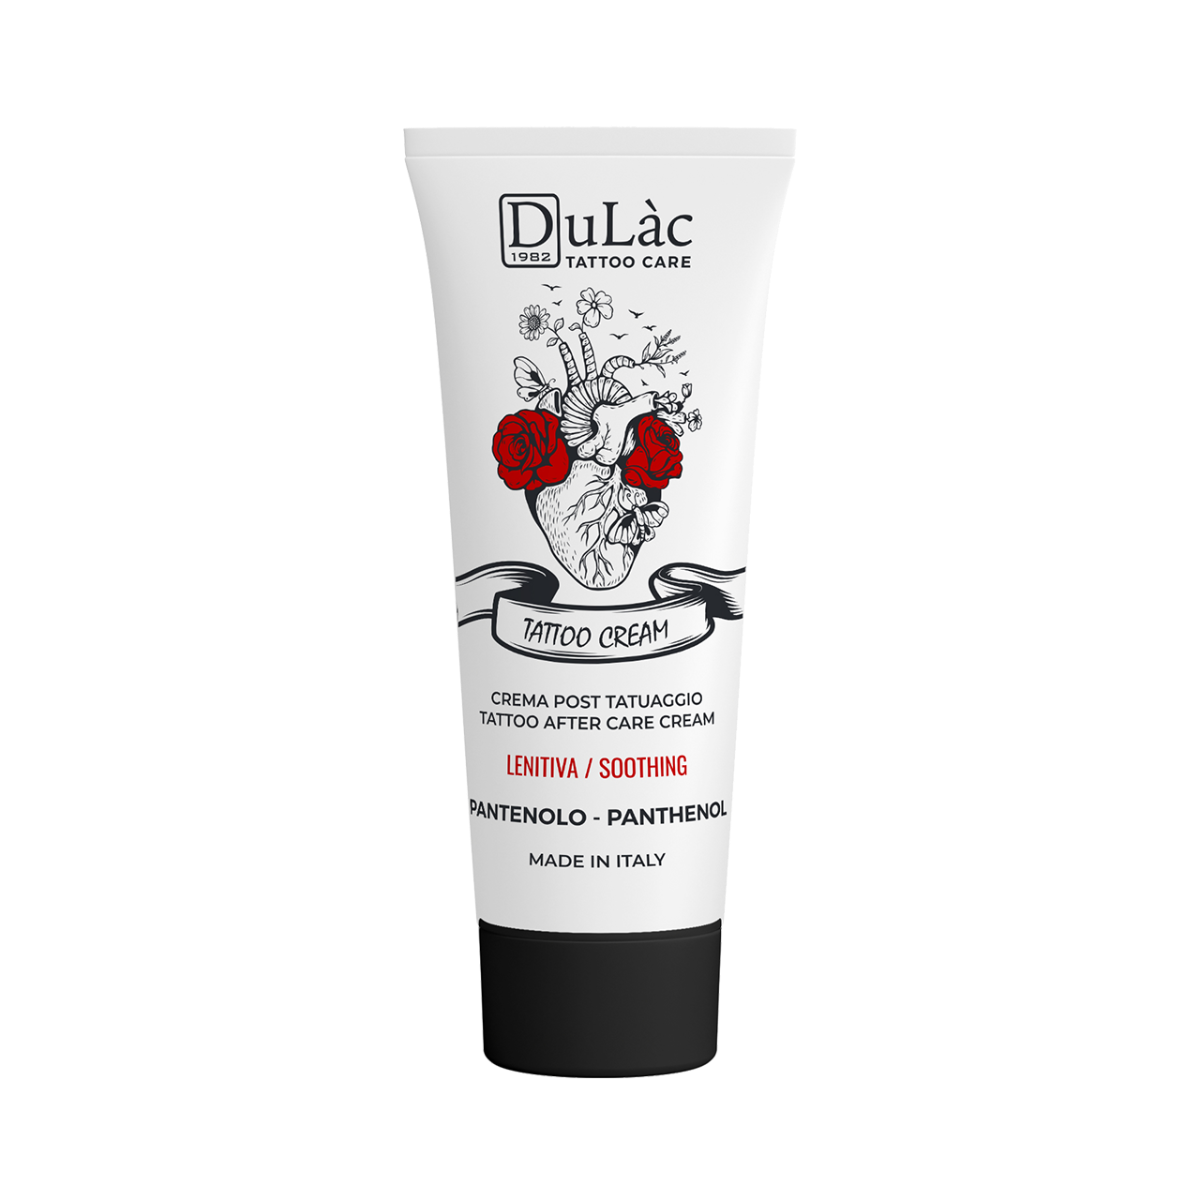 Tattoo Cream rich in Panthenol and Unscented